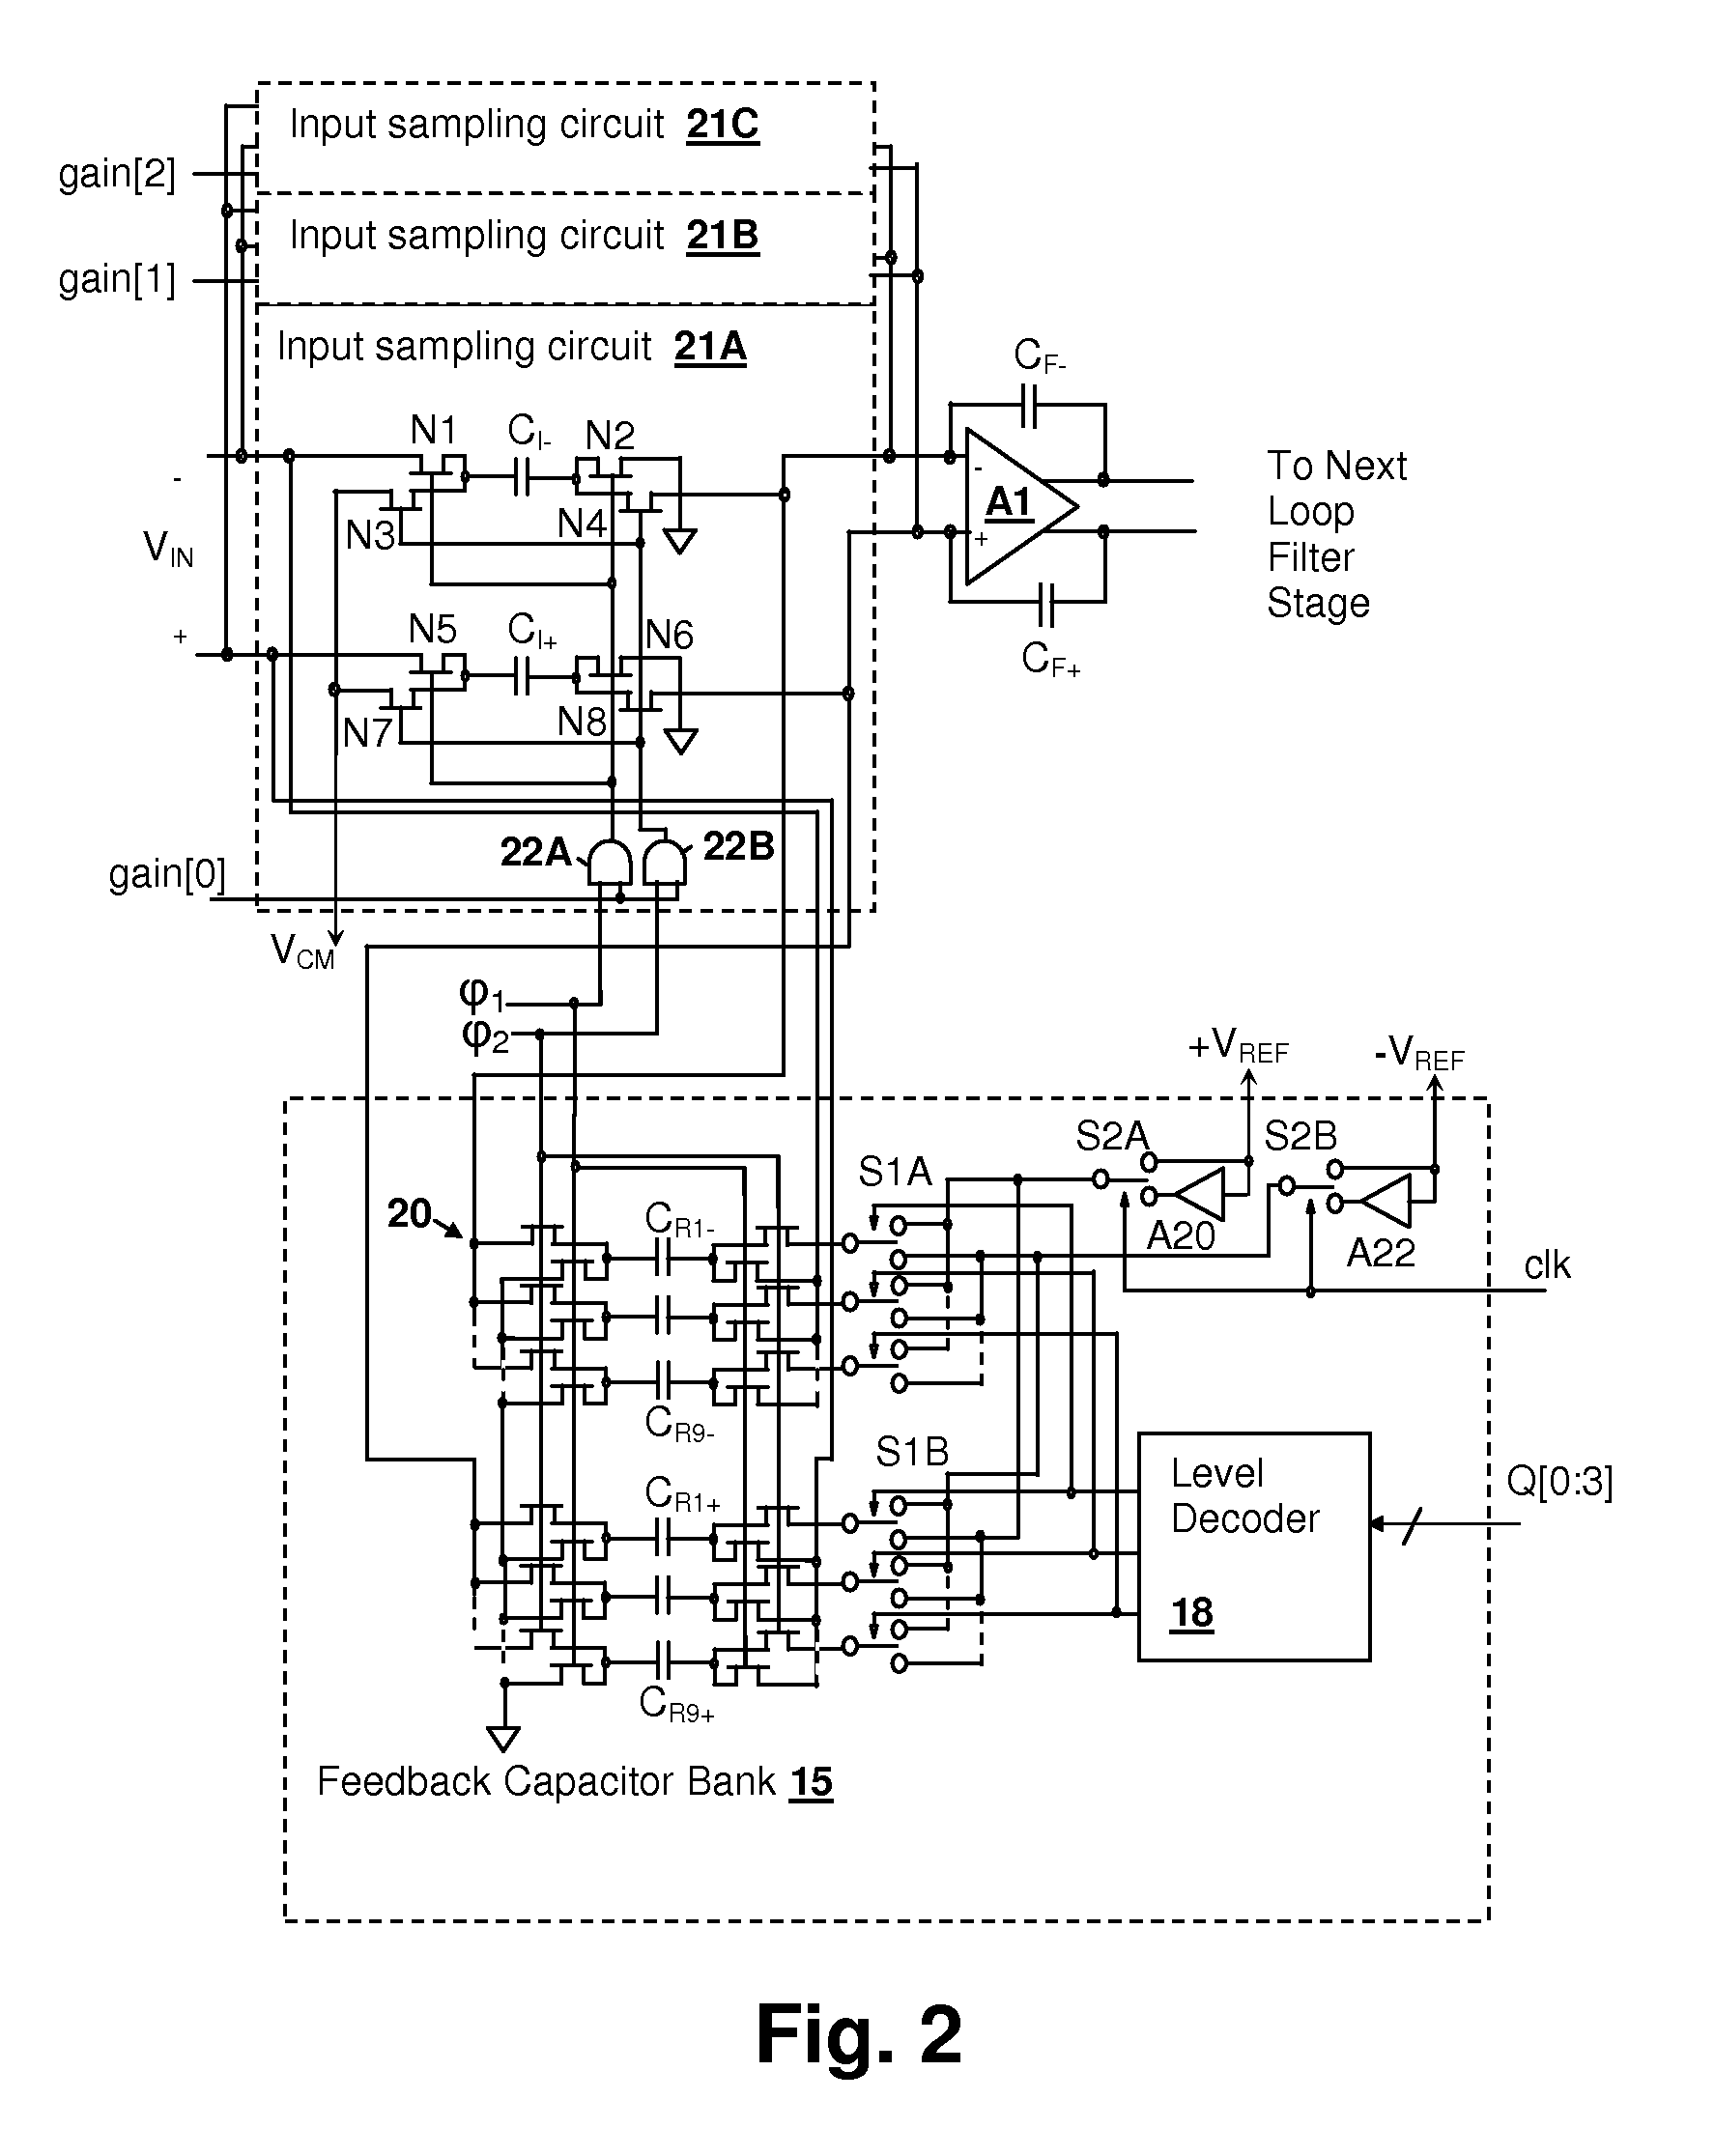 Discrete-time programmable-gain analog-to-digital converter (ADC) input circuit with multi-phase reference application